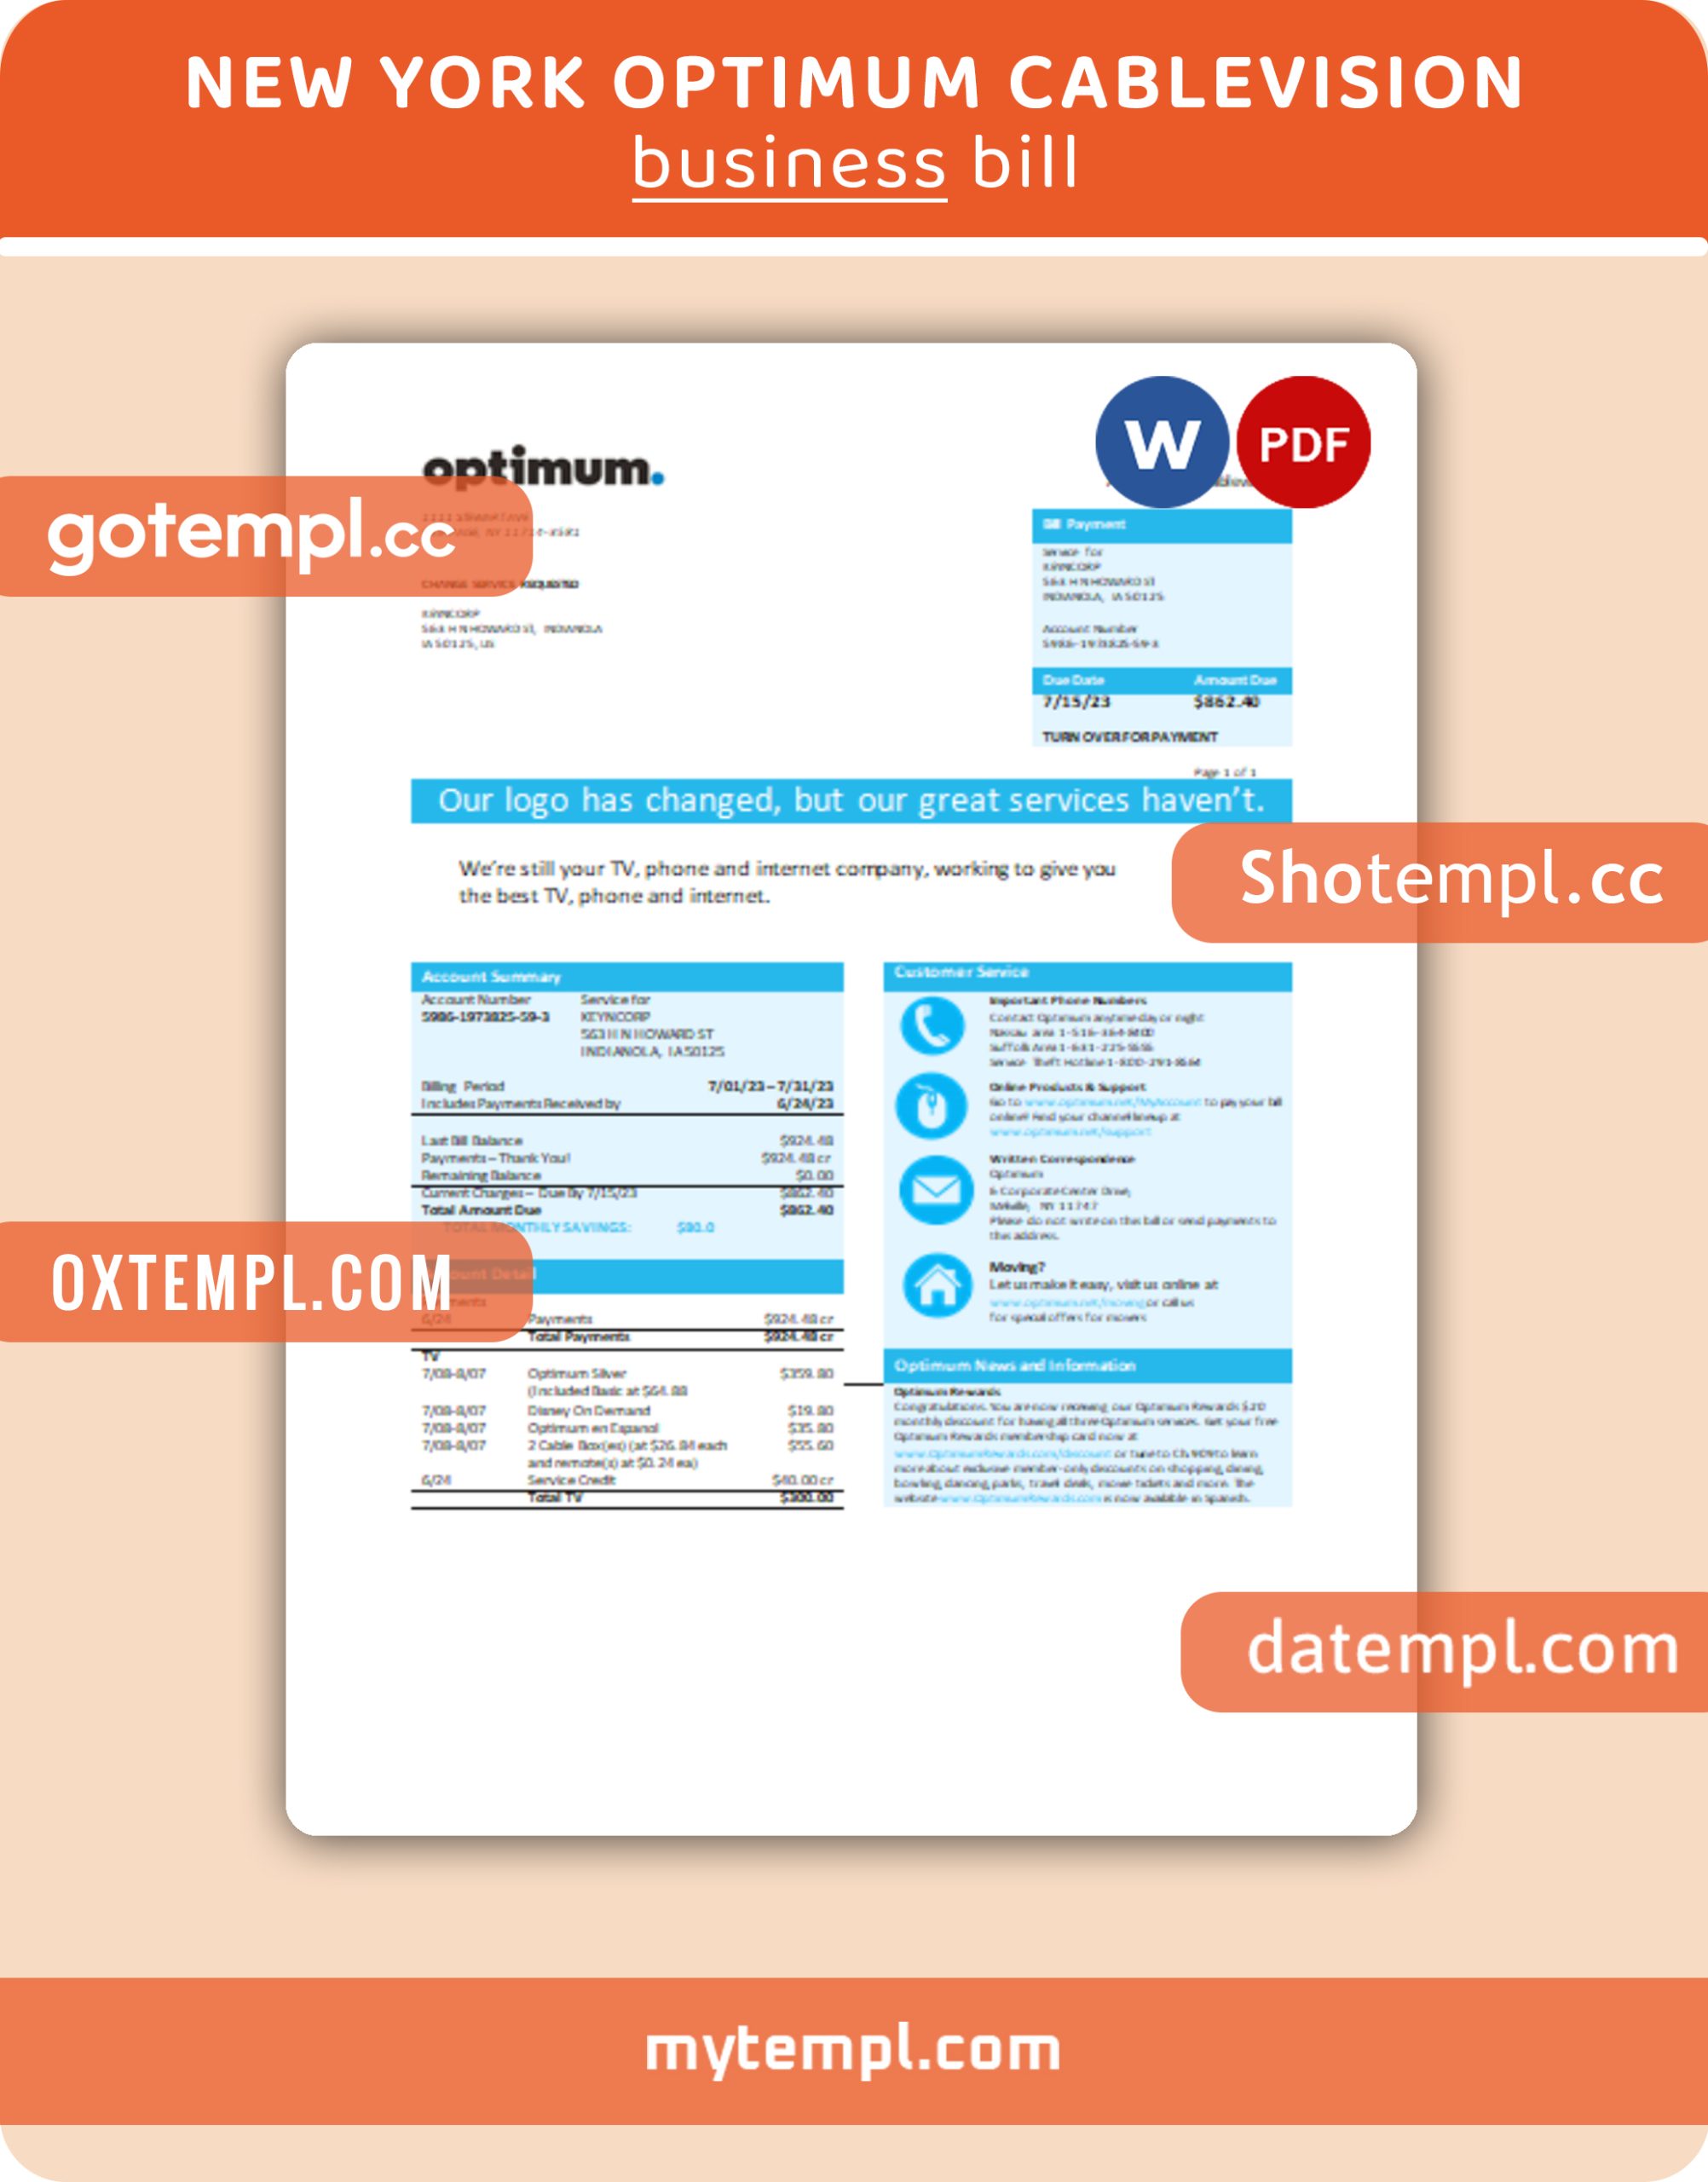 Norway Servebolt high performance hosting company invoice template in Word and PDF format, fully editable